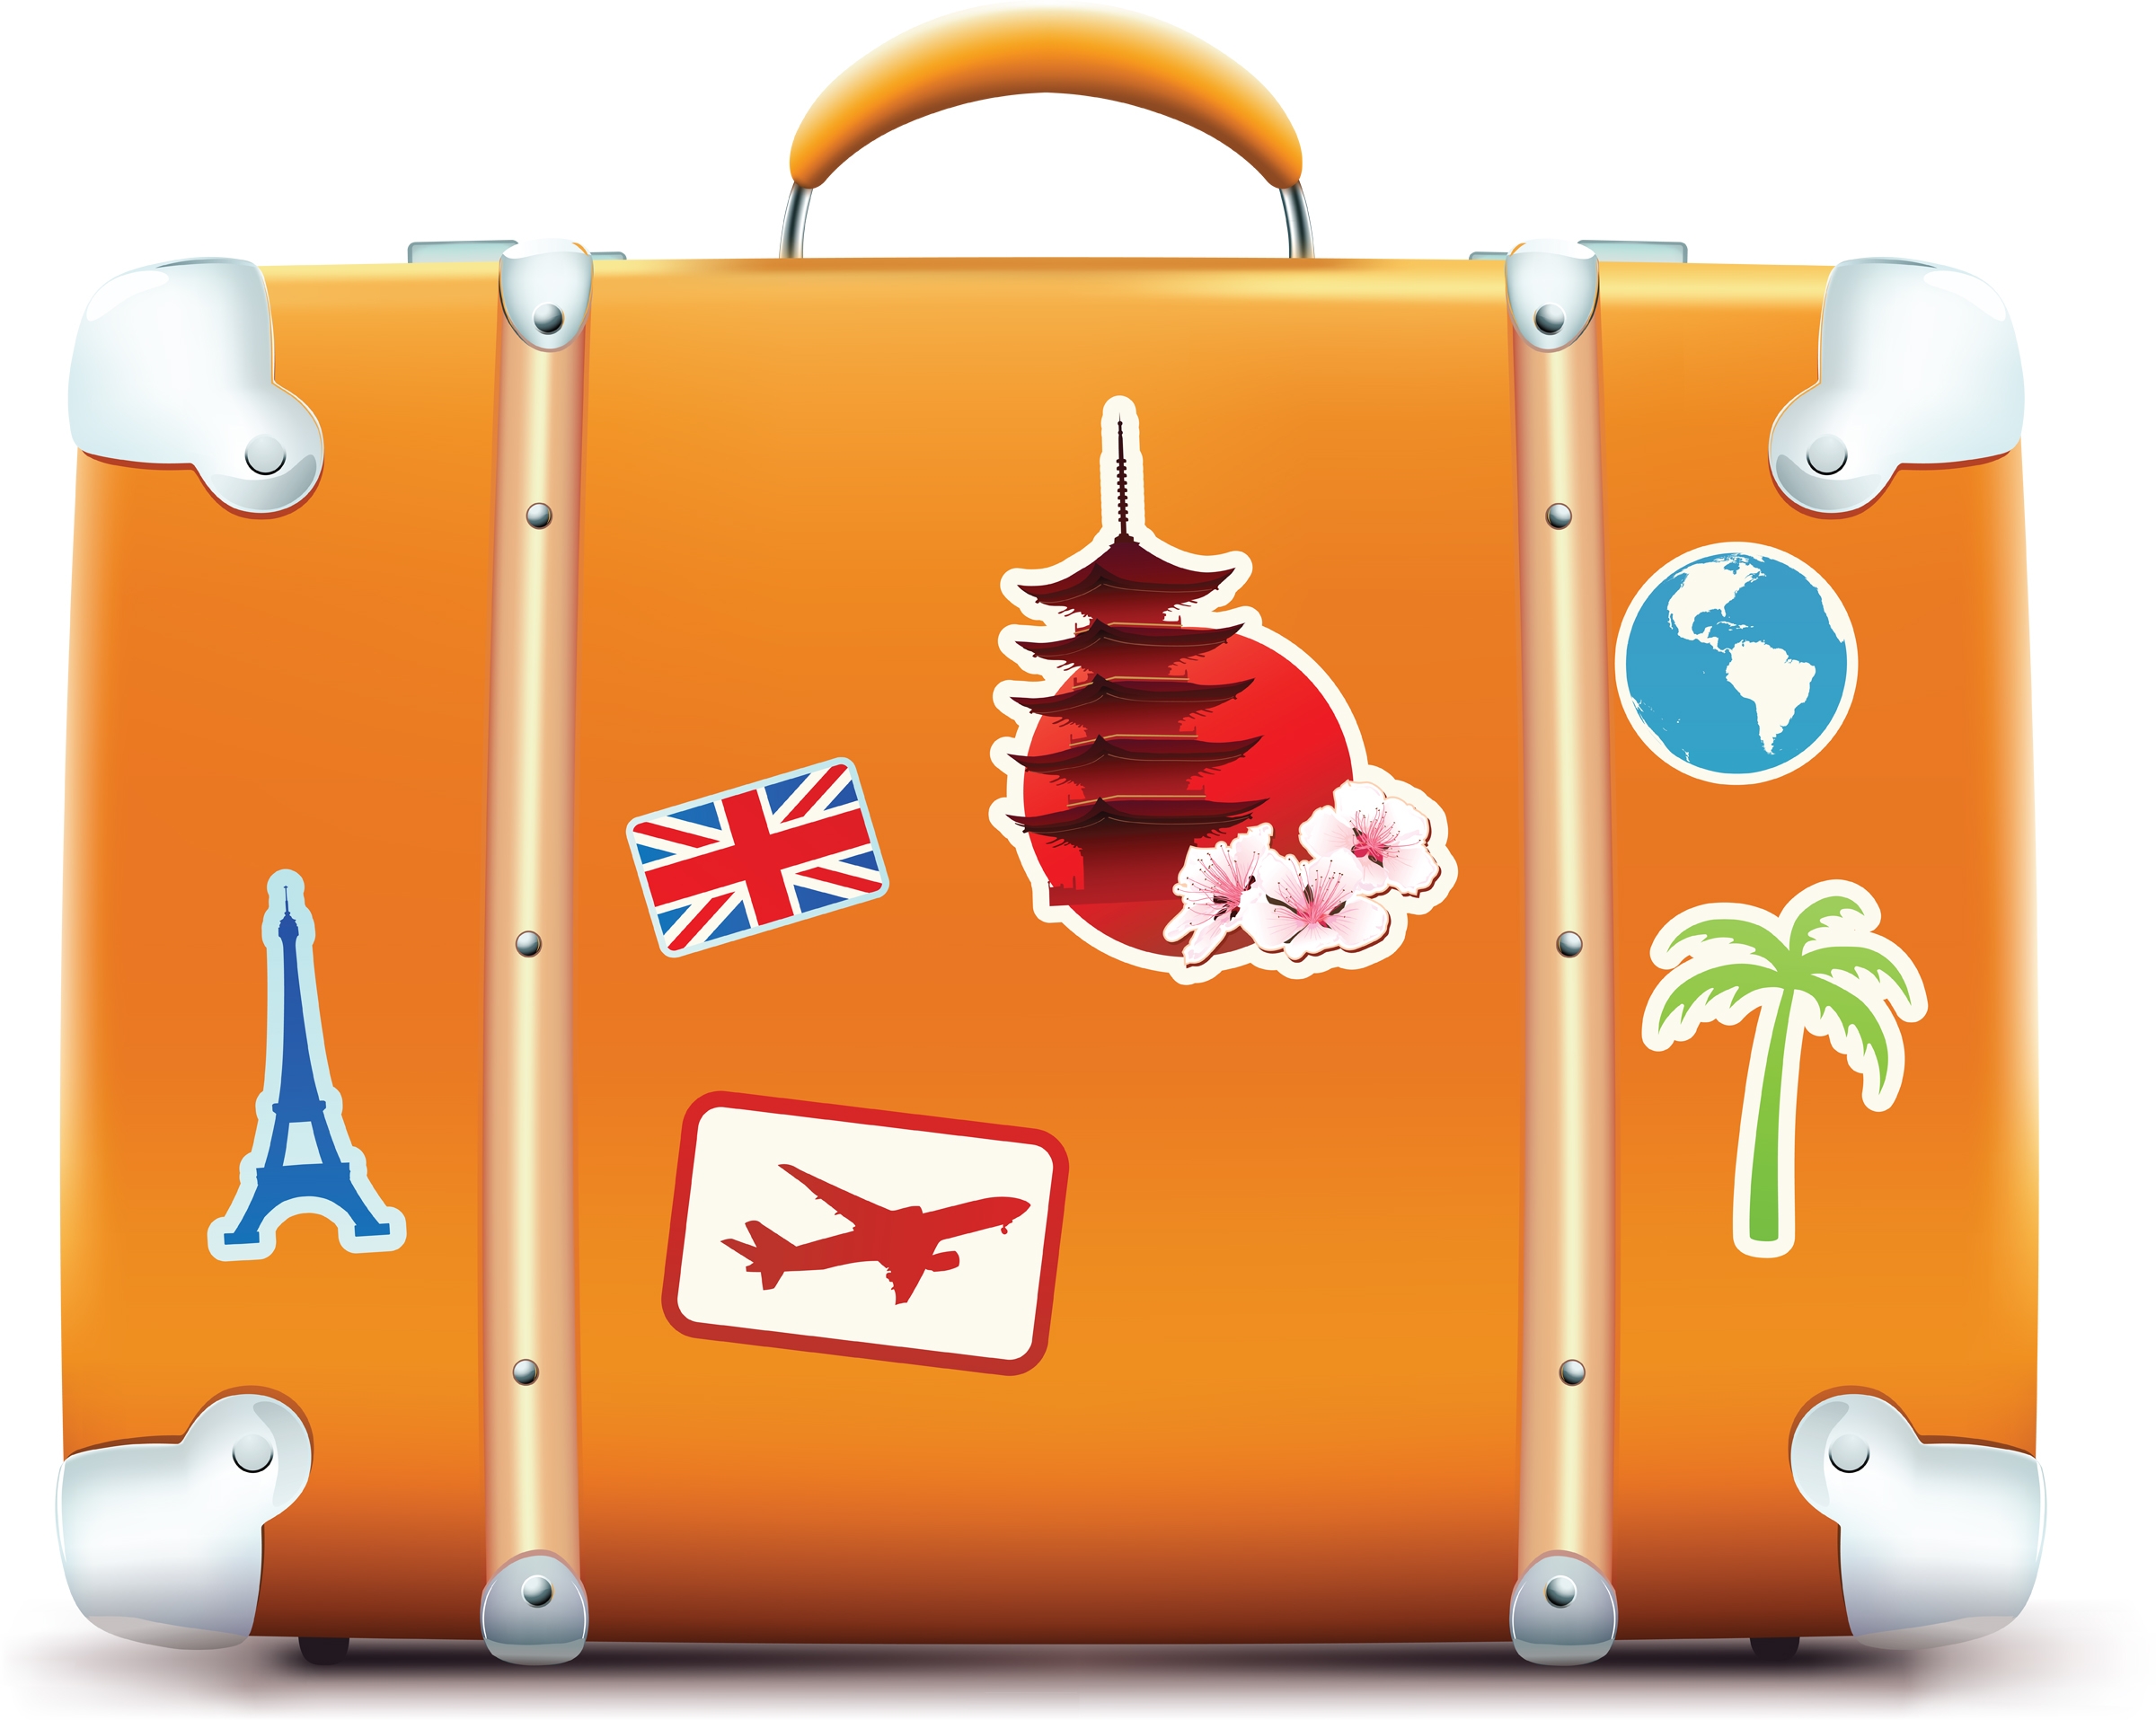 luggage clipart - 18 - l - Luggage clipart Clipground